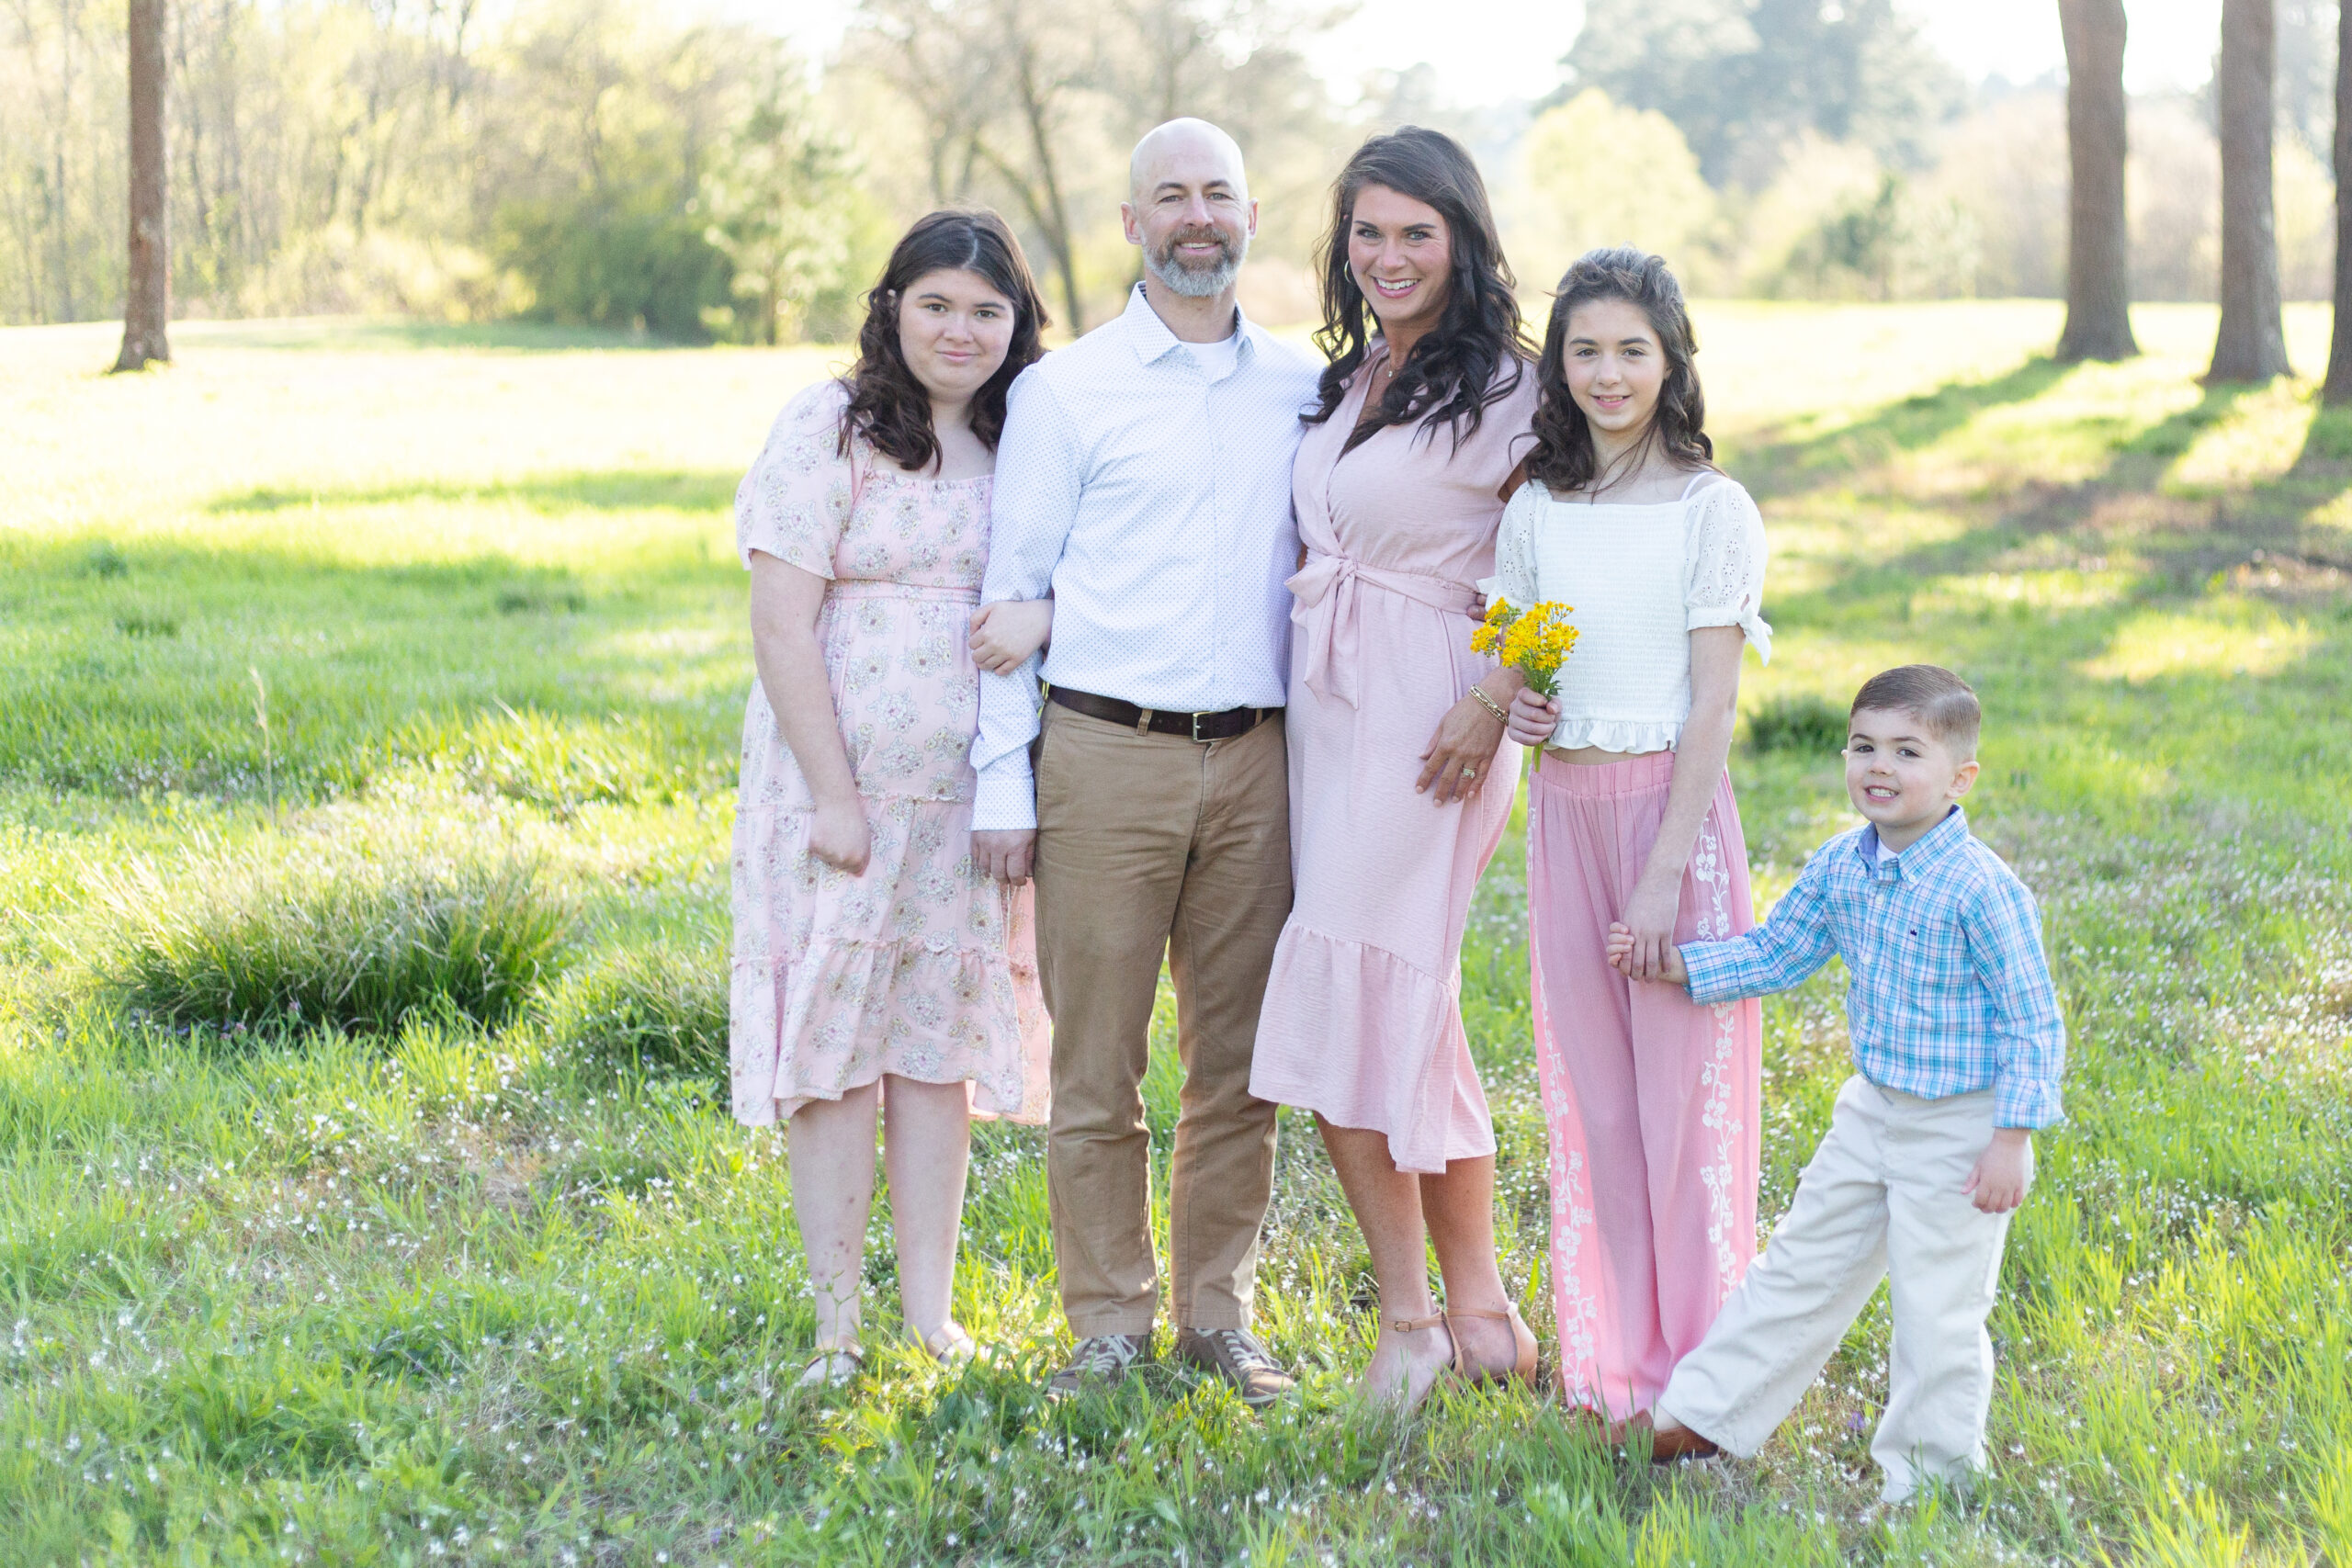 Family of 5 posing for photos in a field in birmingham, alabama